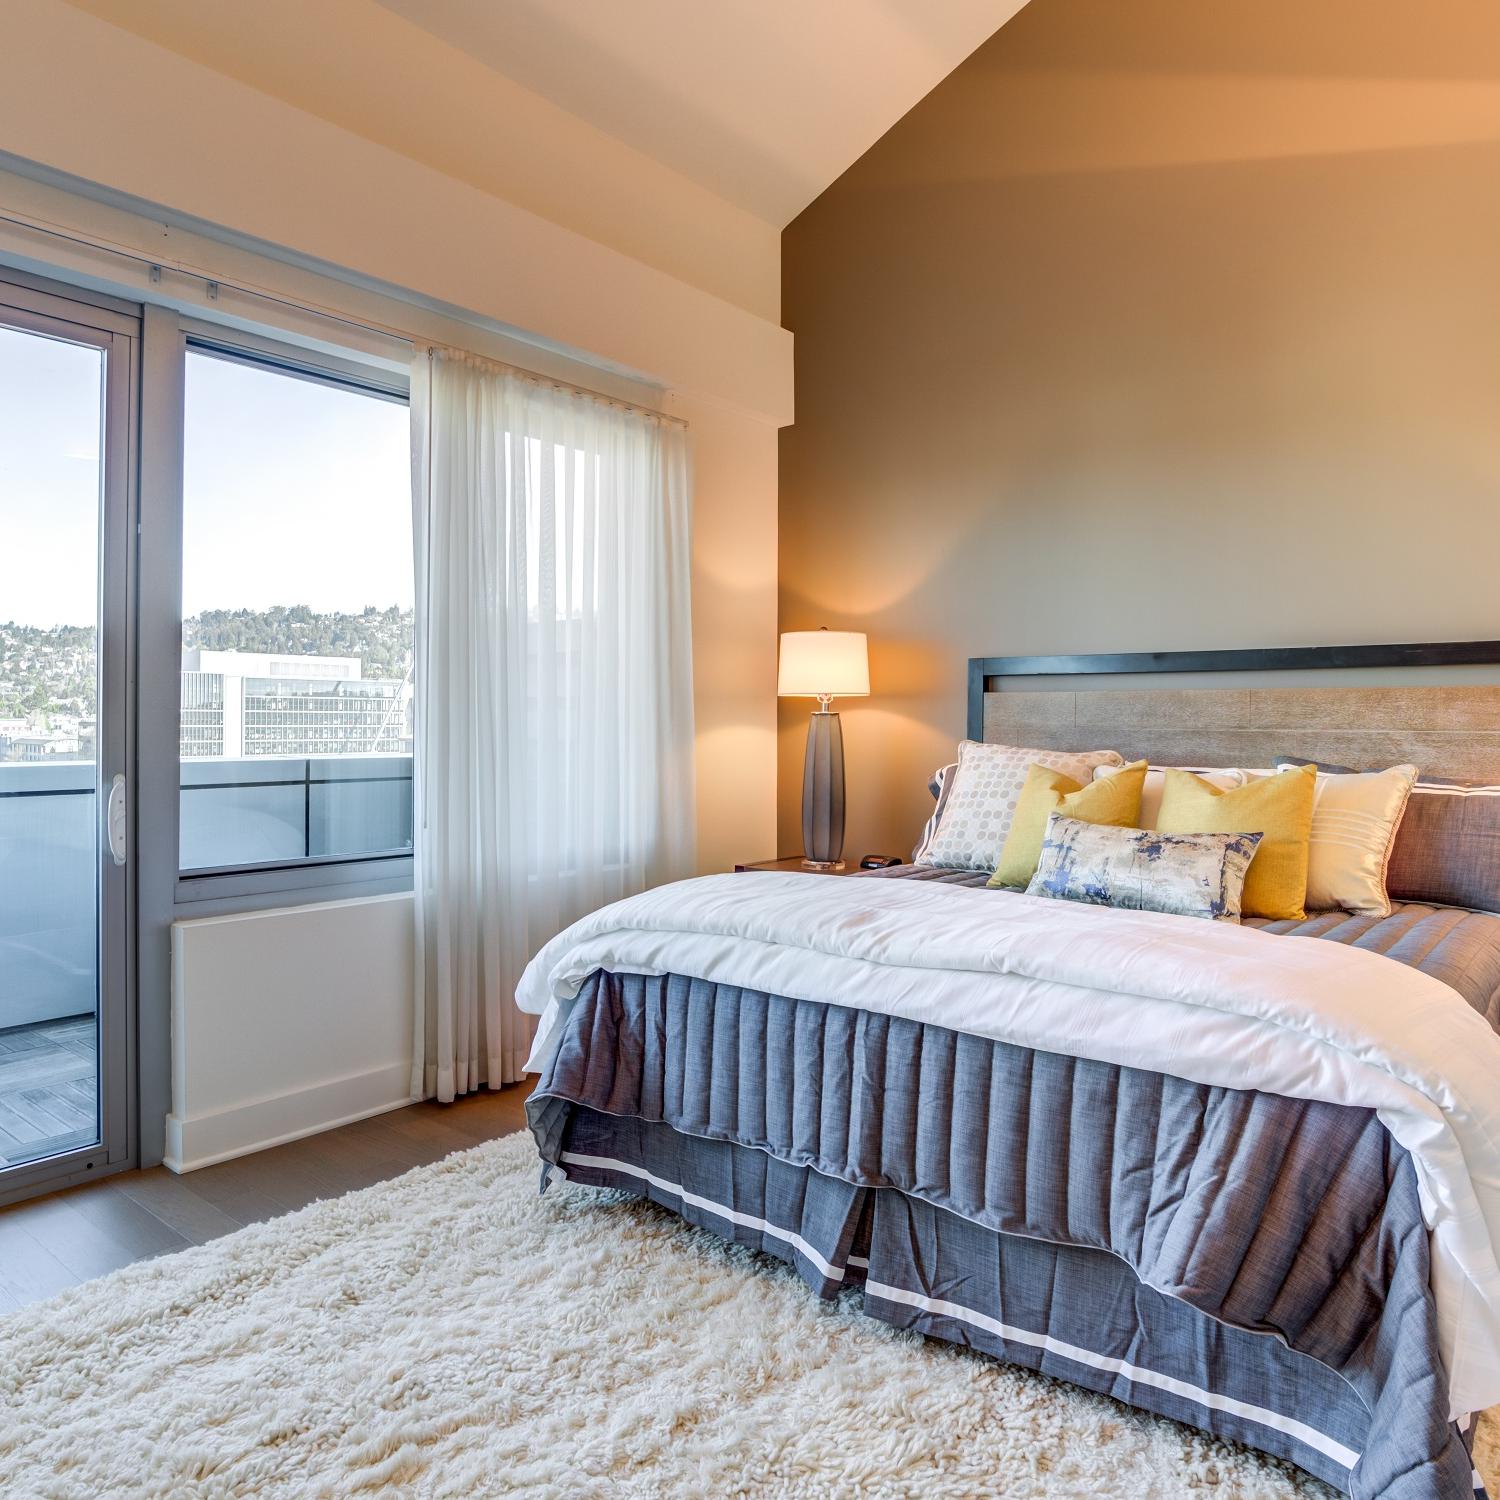 Studio Apartments in Berkeley, CA - Spacious Bedroom with Large Window, Wood Flooring, and Accent Wall.